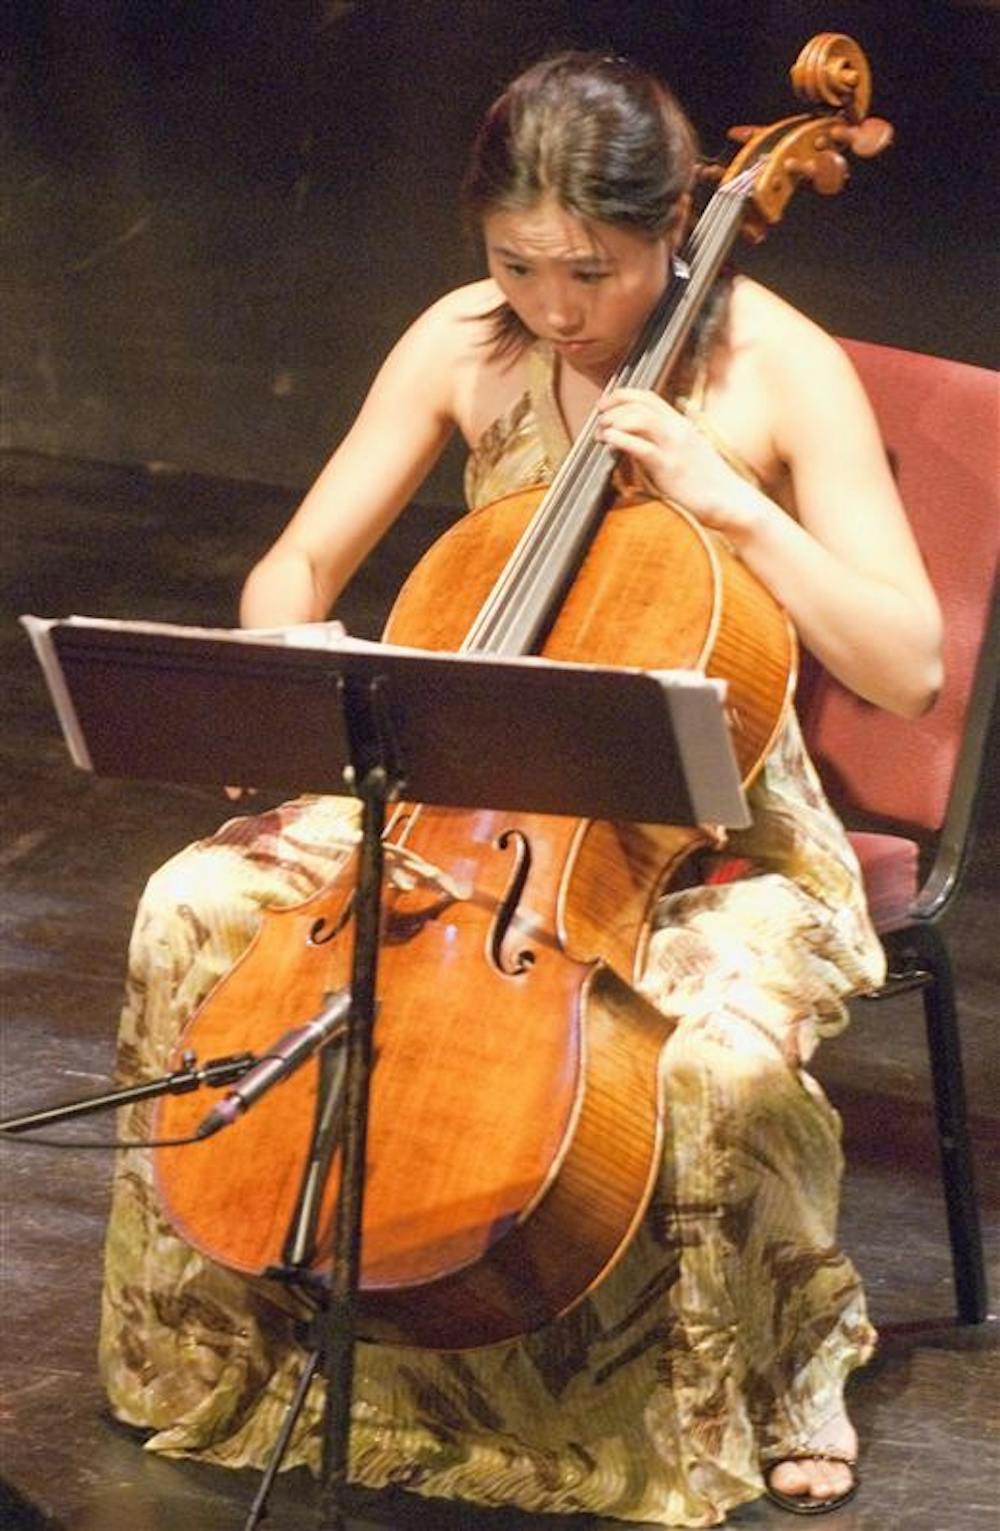 Cellist Jisoo OK, of The Eternal Tango Trio, performs during the Summer Night of Lotus concert Friday evening at the Buskirk-Chumley Theater. The event marked the kick-off to the 2009 Lotus season.